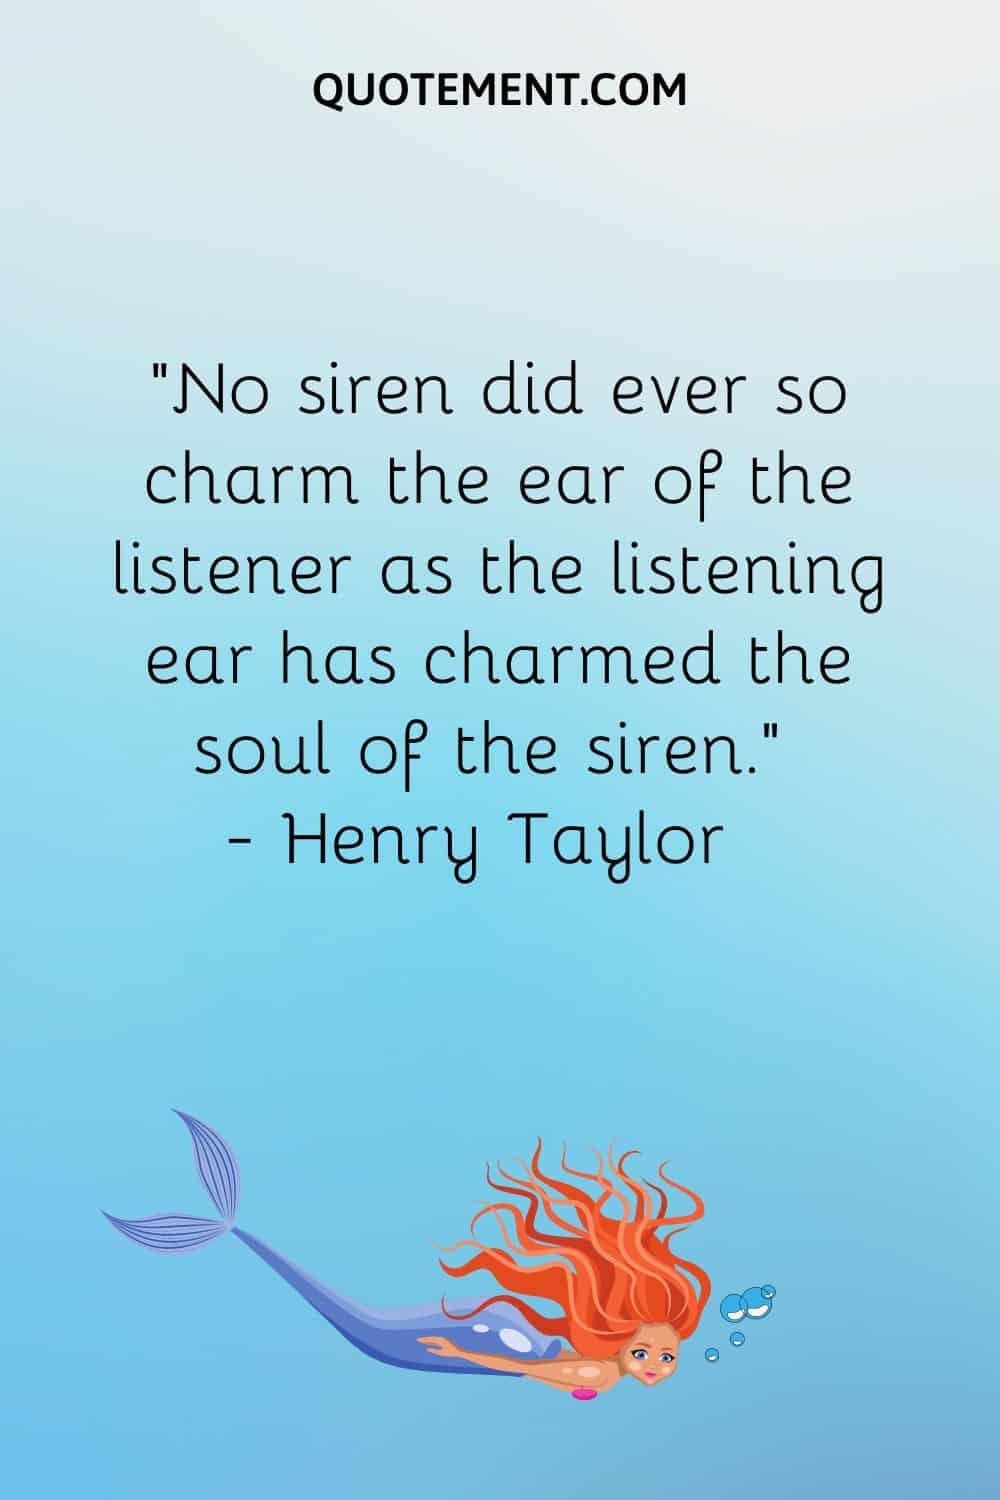 “No siren did ever so charm the ear of the listener as the listening ear has charmed the soul of the siren.” ― Henry Taylor